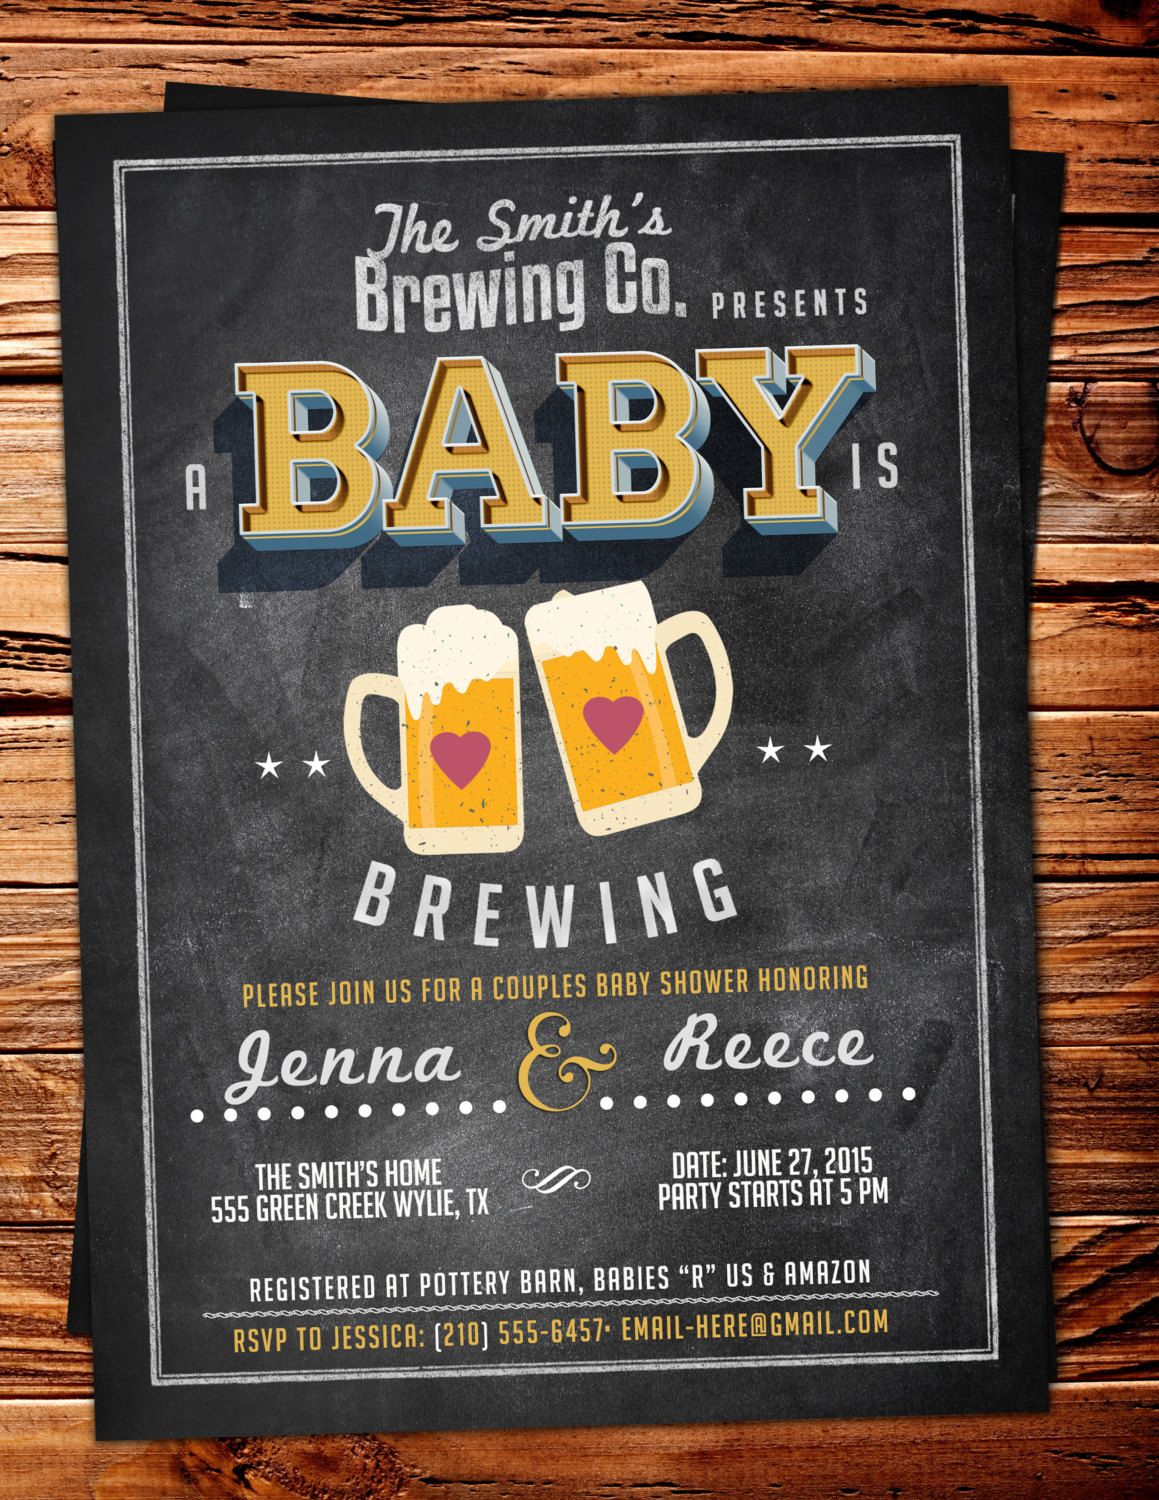 Full Size of Baby Shower:precious Coed Baby Shower Picture Designs Coed Baby Shower Couples Baby Shower Invitations Coed Baby Shower Unibaby Shower Ideas